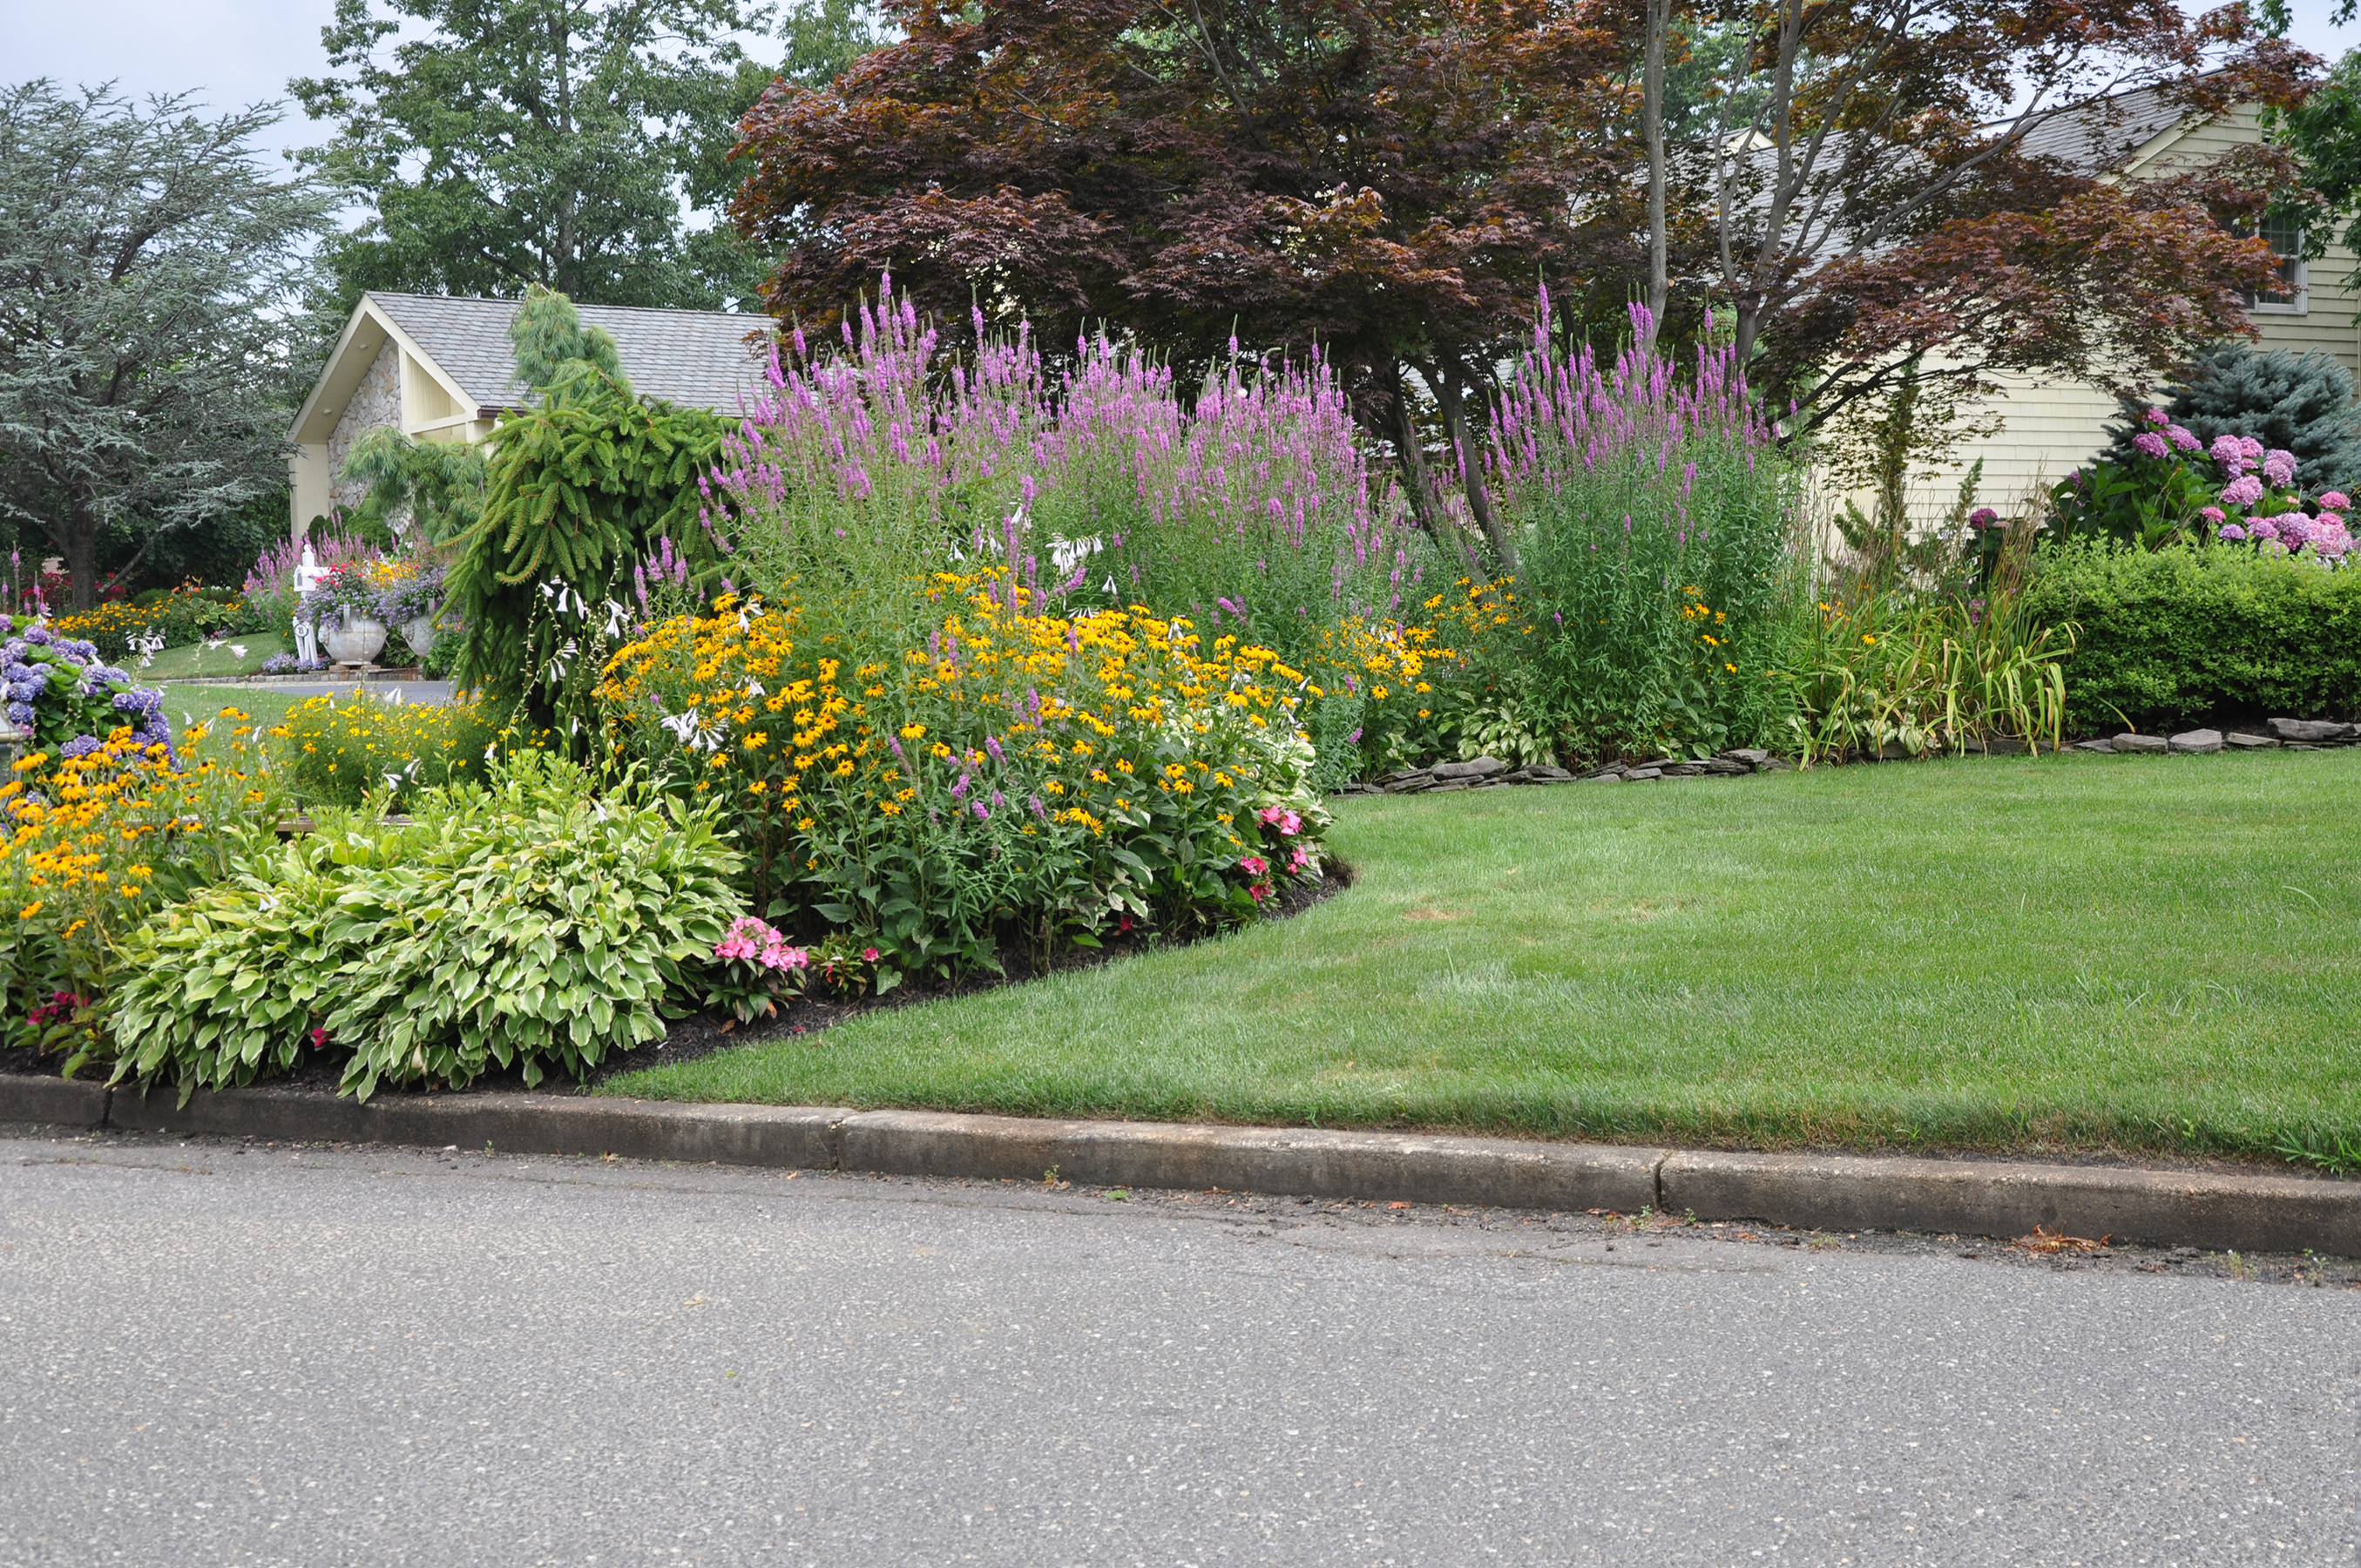 IV. Planting Black-Eyed Susans: Best practices and tips